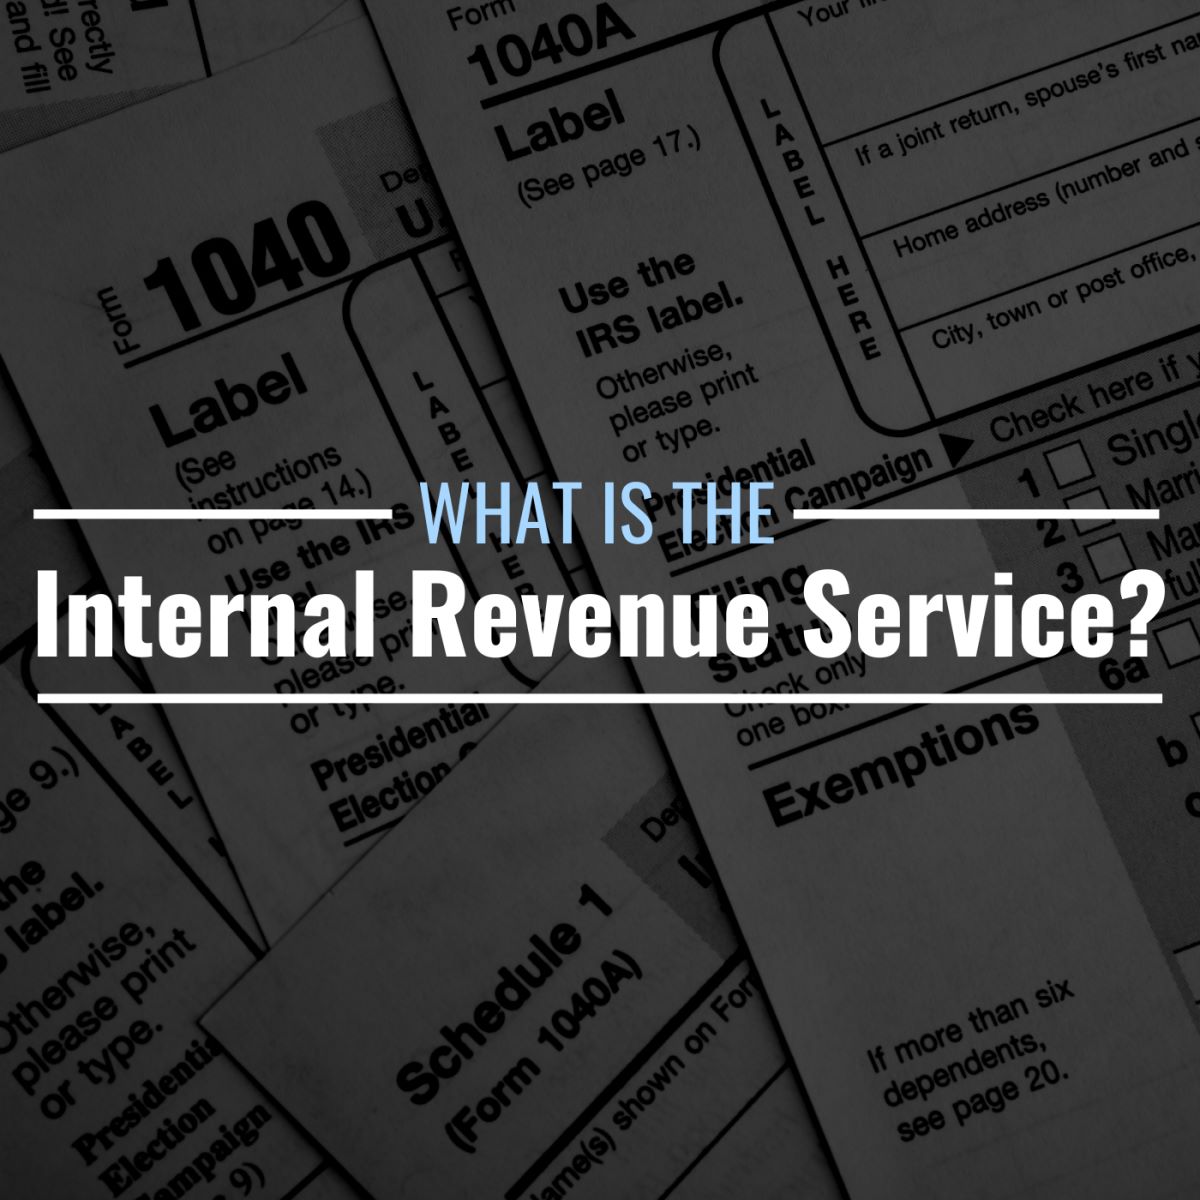 What Does IRS Mean In Text?